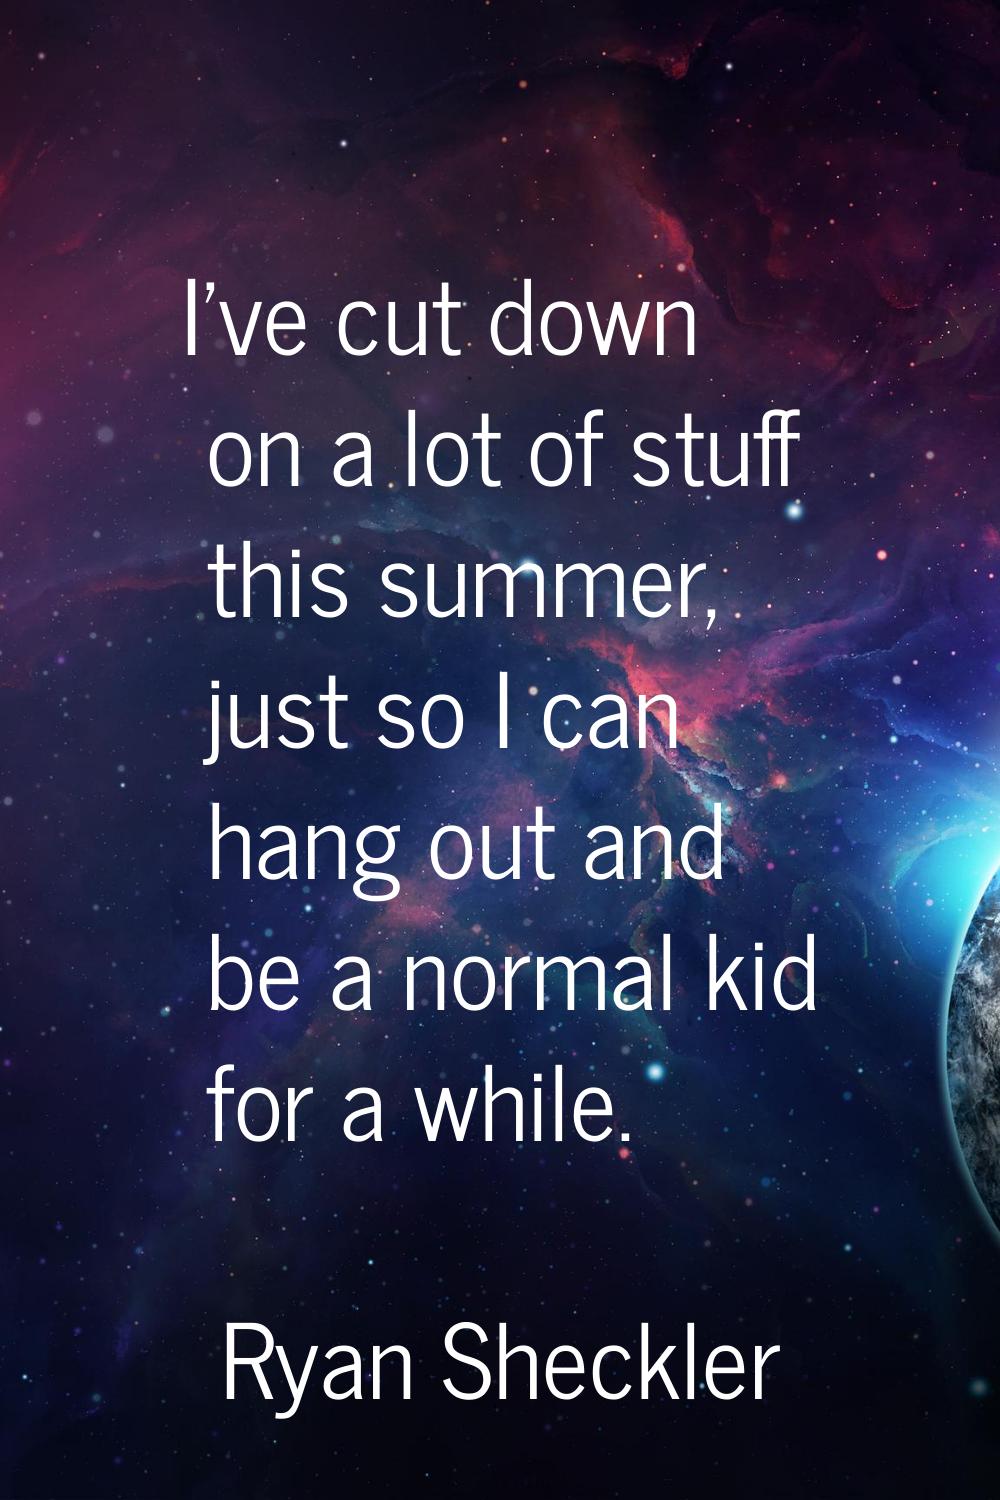 I've cut down on a lot of stuff this summer, just so I can hang out and be a normal kid for a while